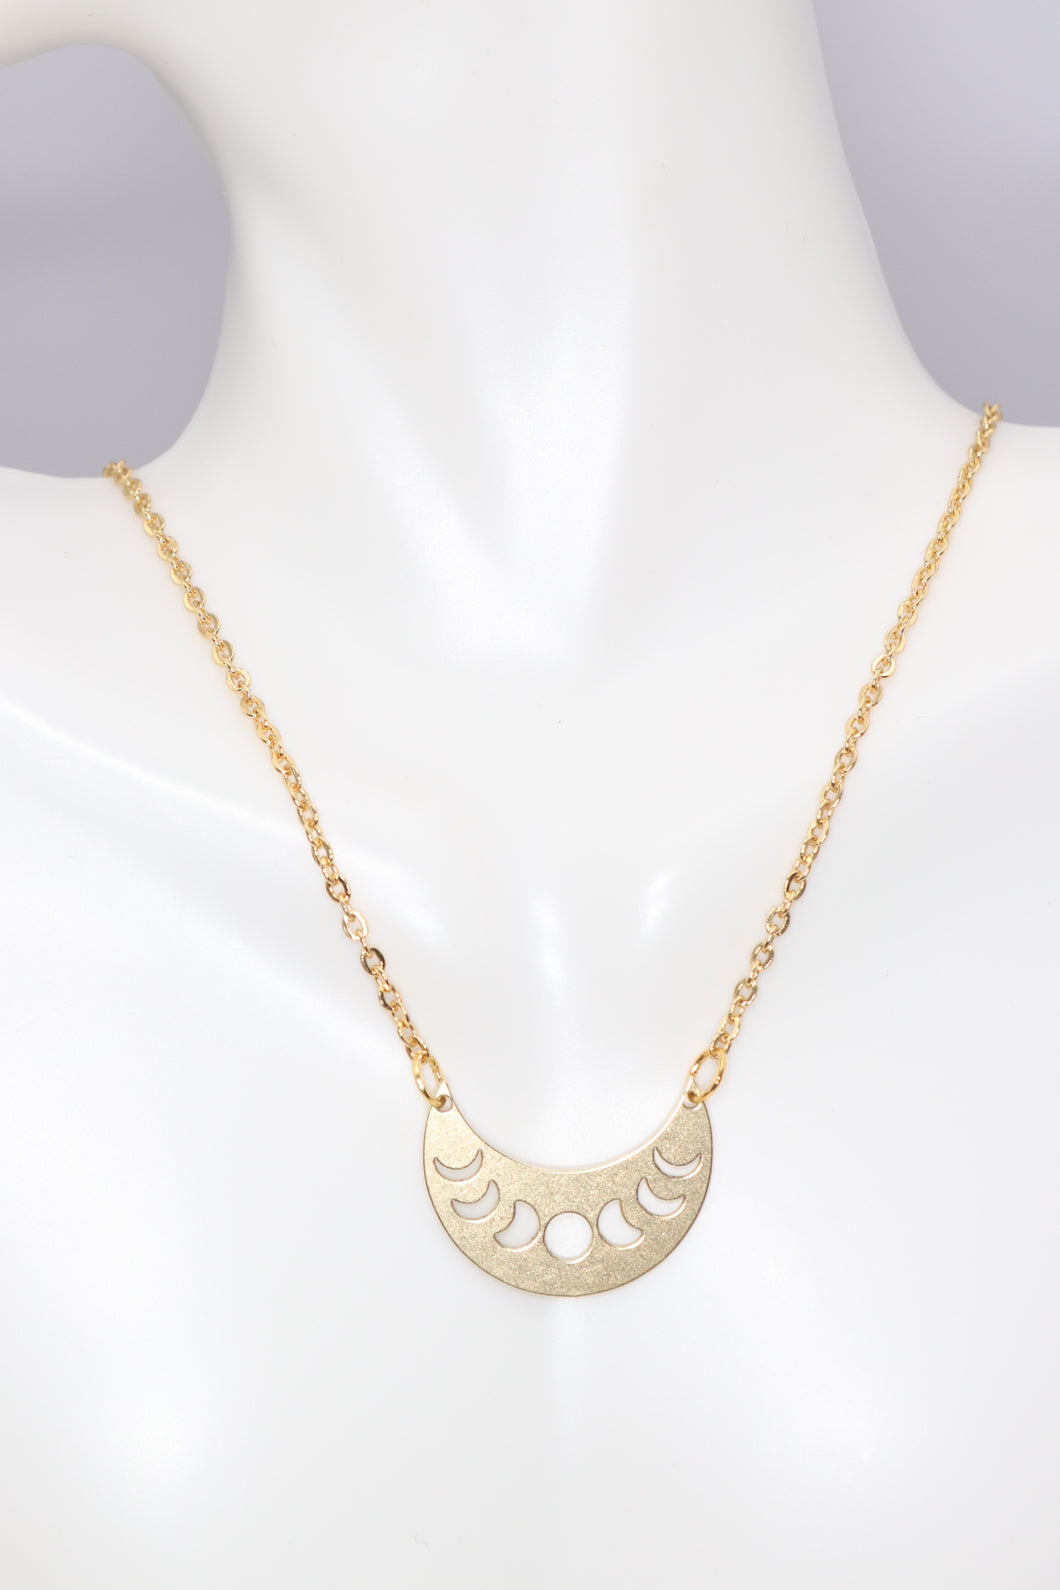 Golden Moon Phase Necklace